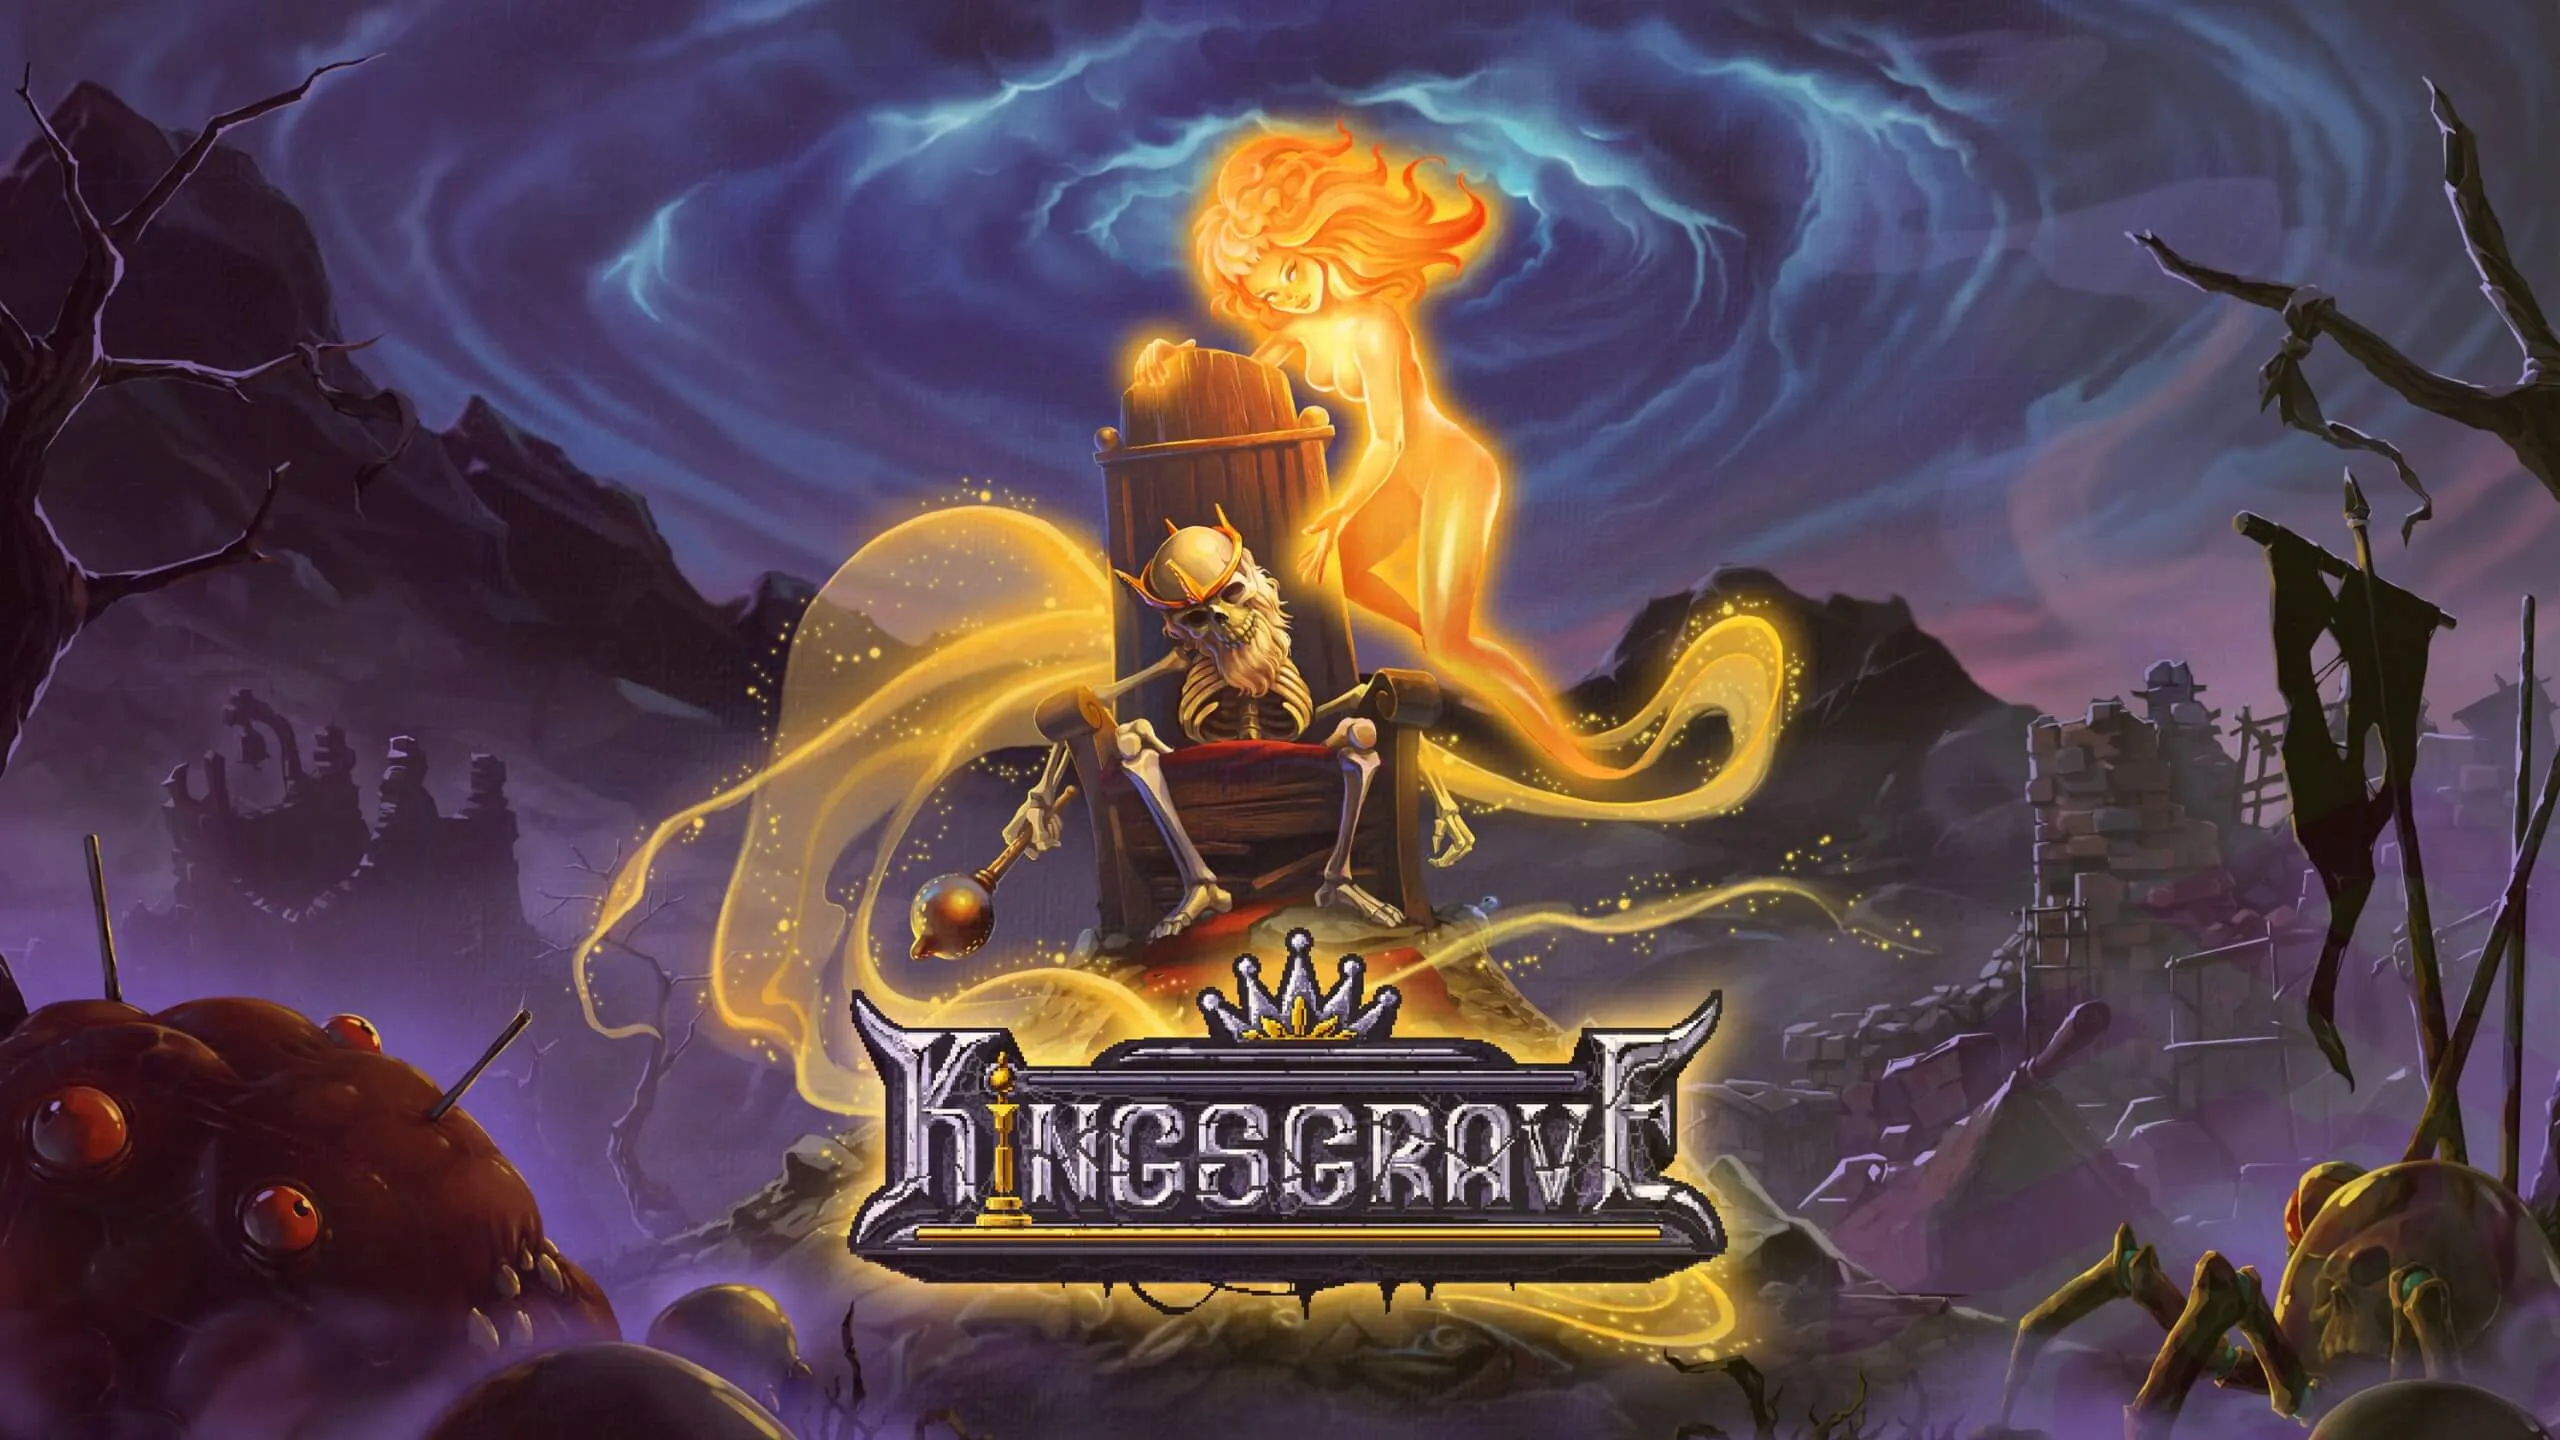 Main Keyart of Kinsgrave game with a skeleton on throne